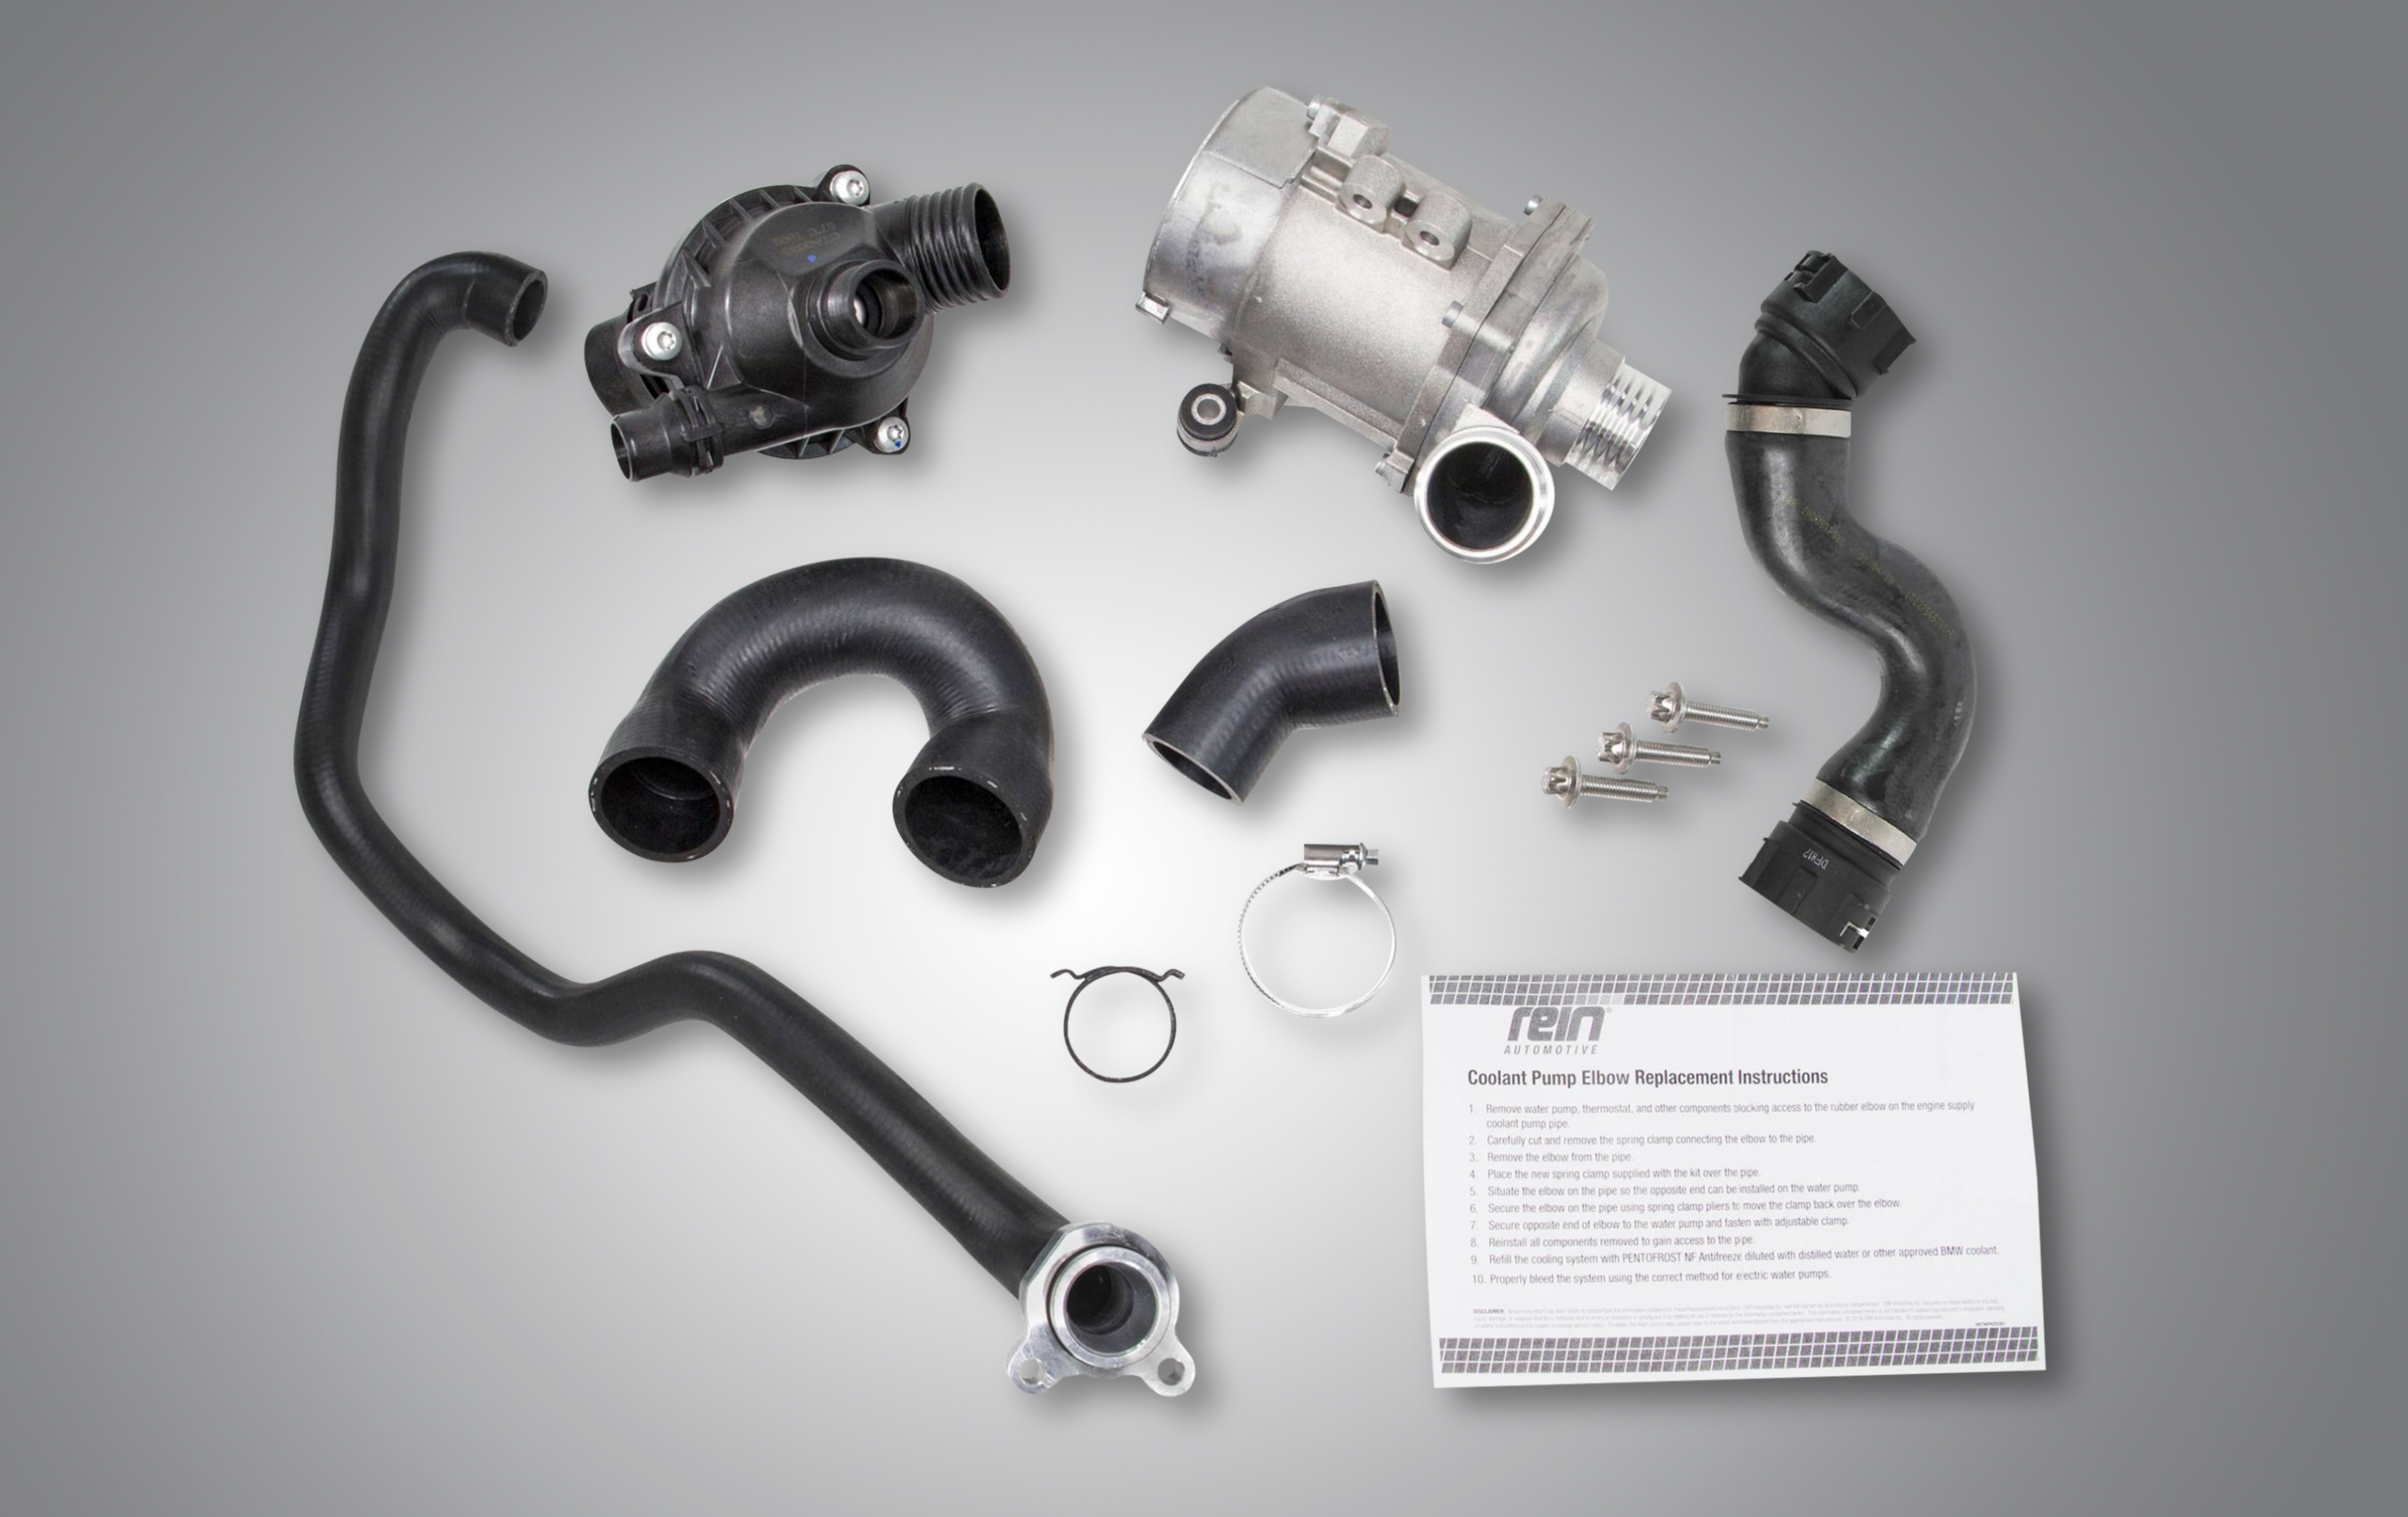 CRP Automotive (crpautomotive.com), a leading source of OE-quality replacement and service parts, has developed a first-to-market water pump assembly kit that services some of the most popular BMW water pump applications from 2007-2010. 